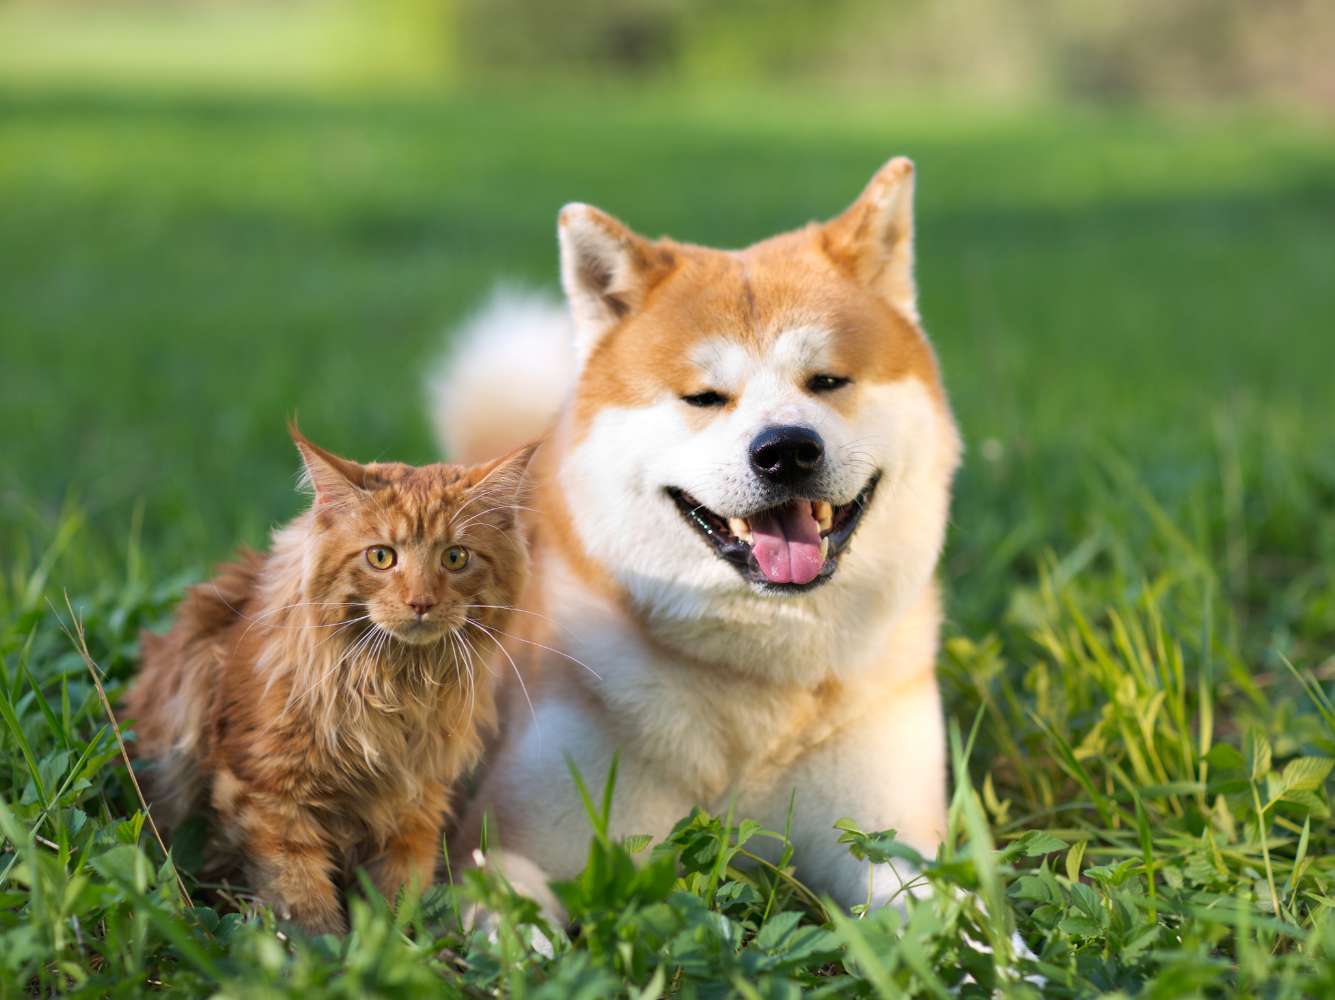 a dog and cat lying in grass